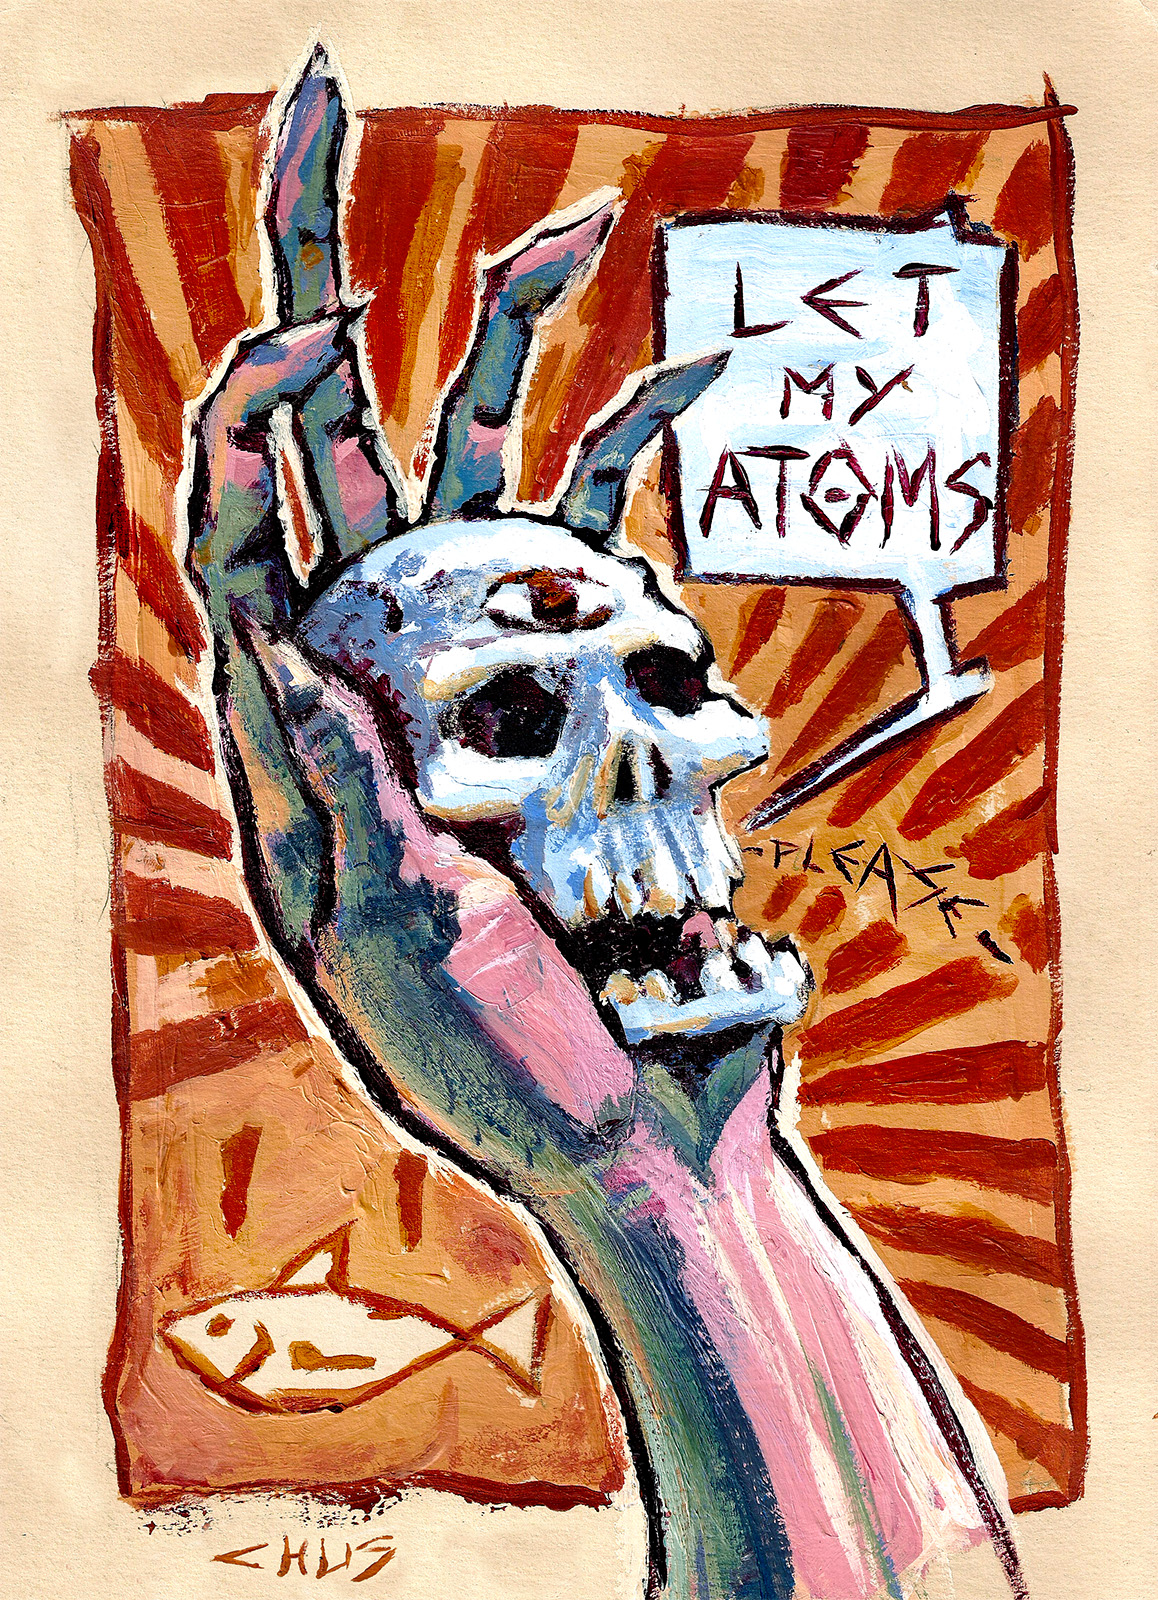 Let my atoms: acrylic on paper